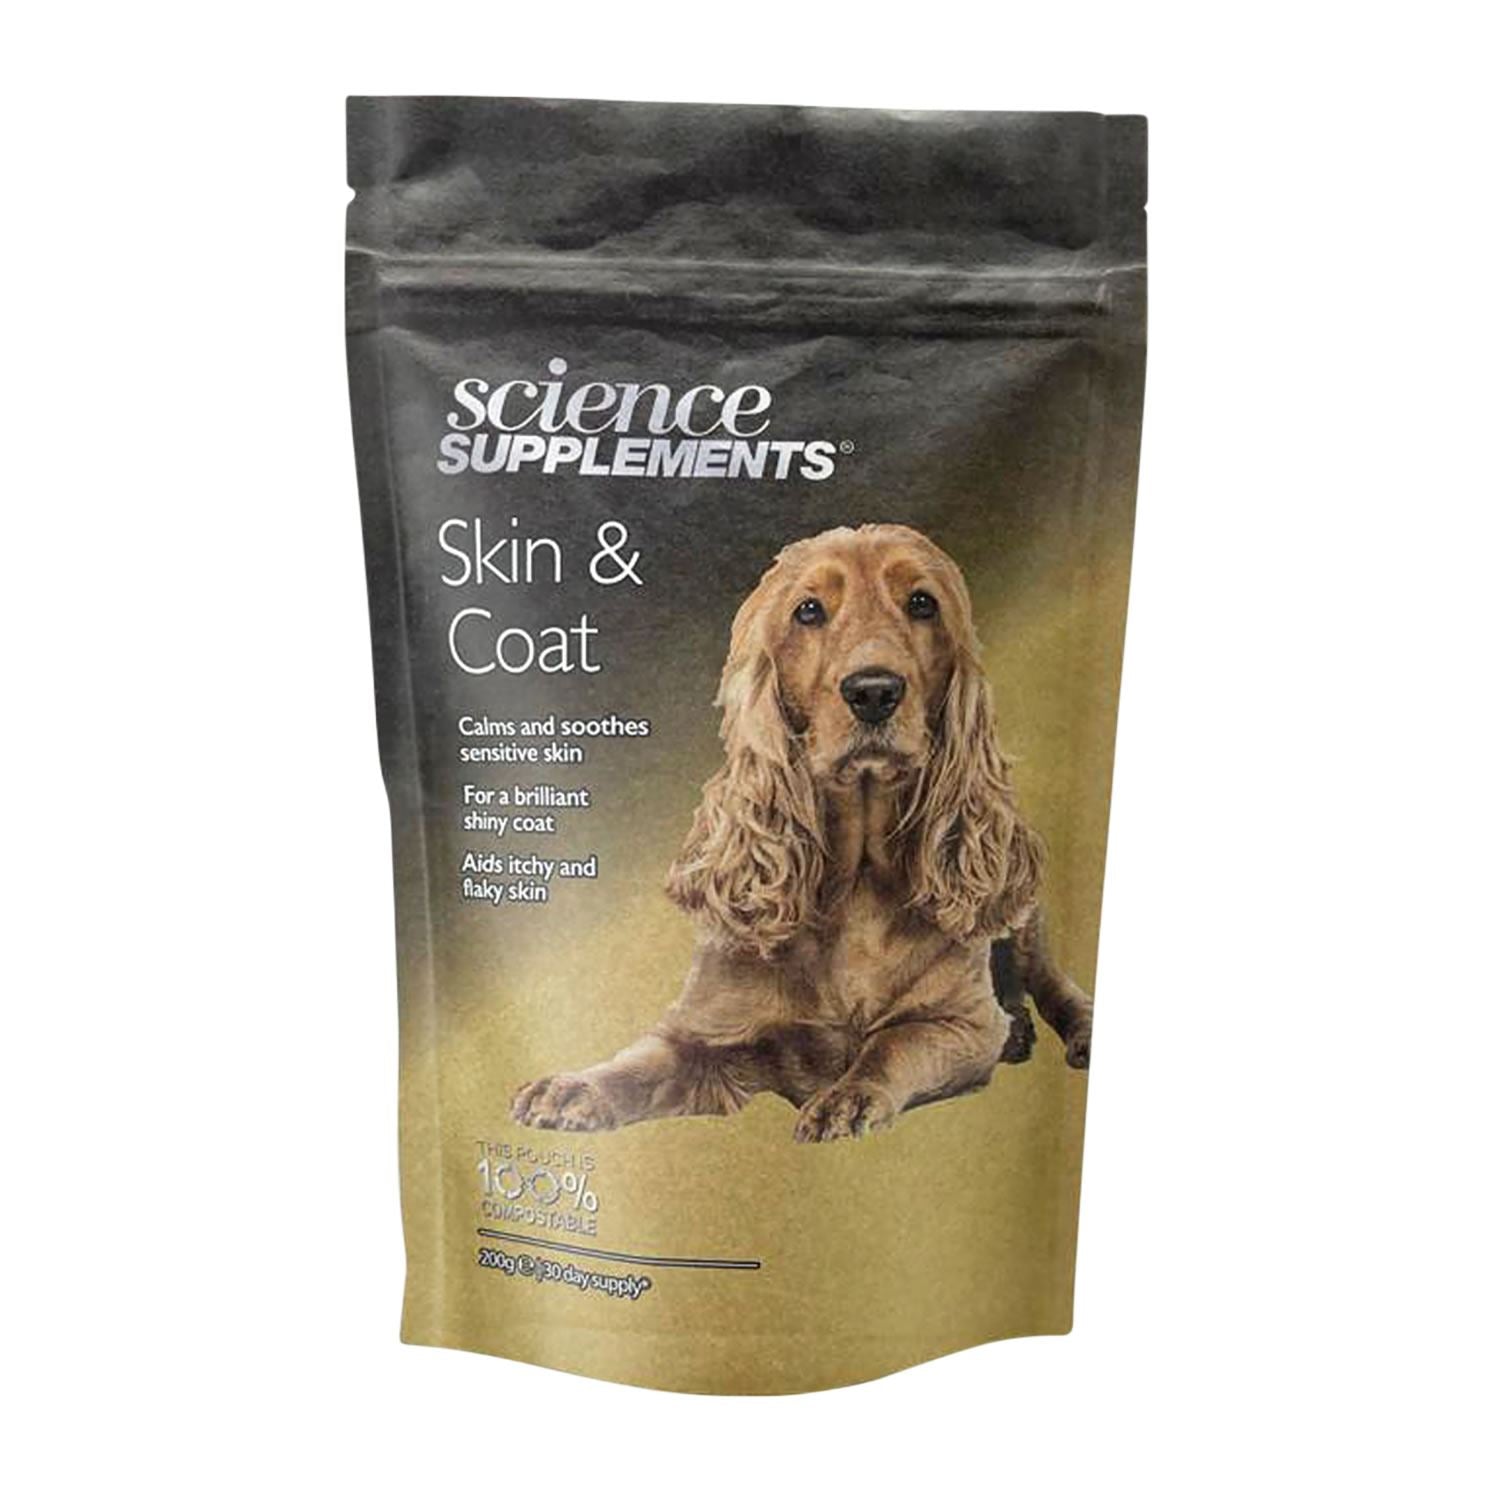 Science Supplements Skin & Coat K9 - Just Horse Riders